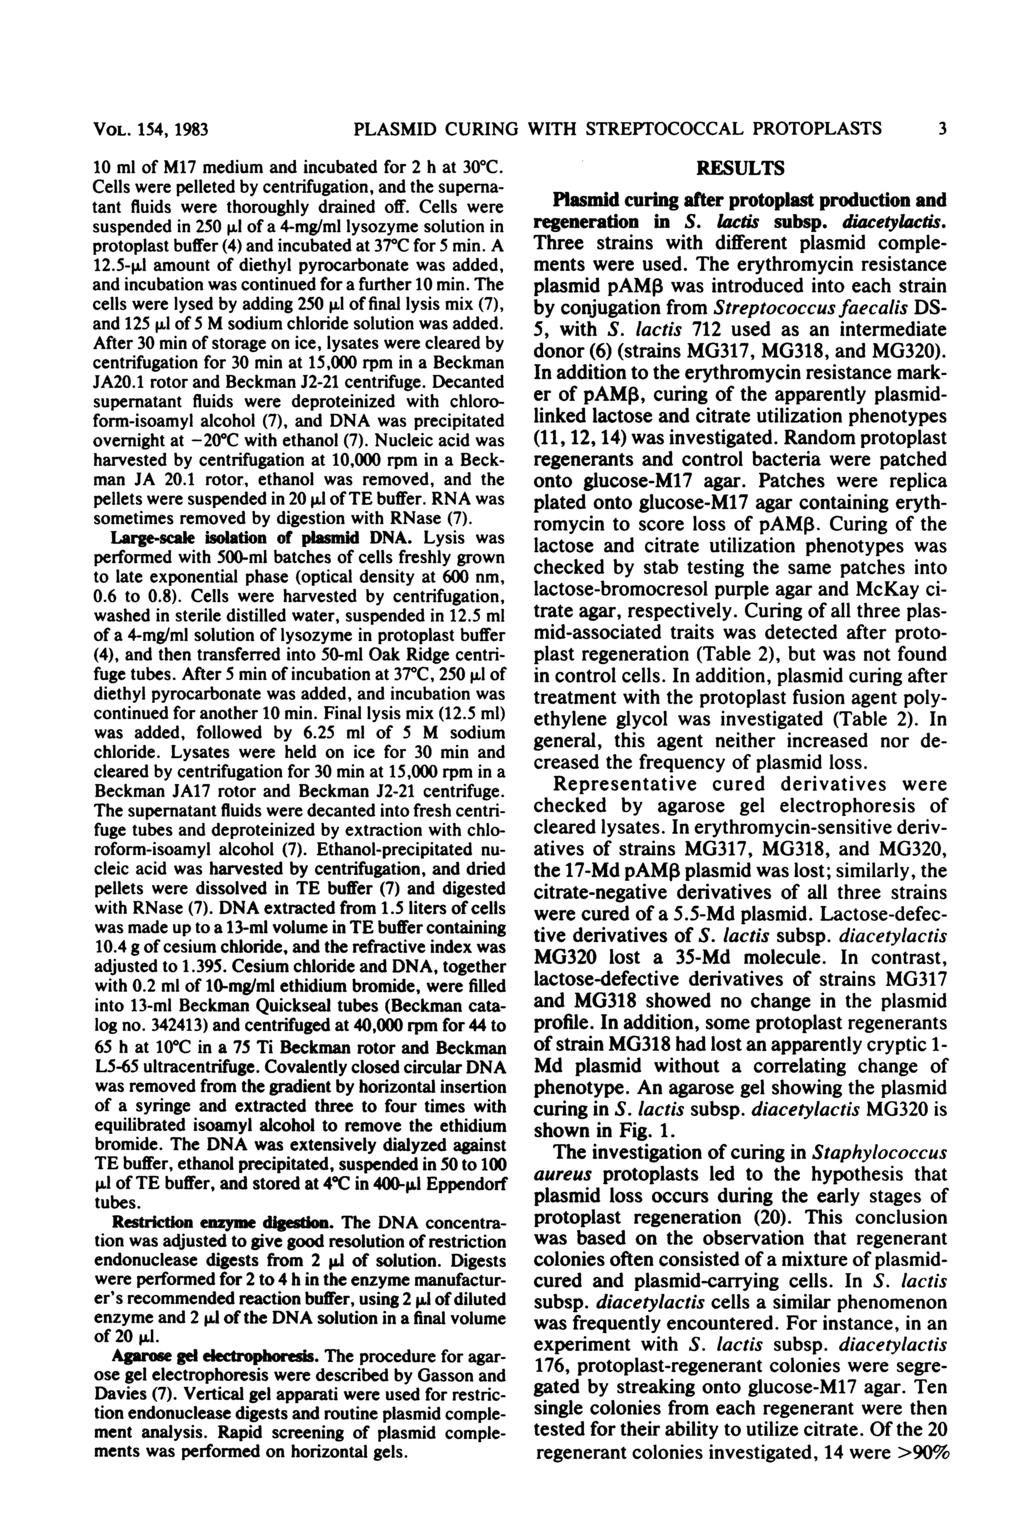 VOL. 154, 1983 PLASMID CURING WITH STREPTOCOCCAL PROTOPLASTS 3 10 ml of M17 medium and incubated for 2 h at 30 C.